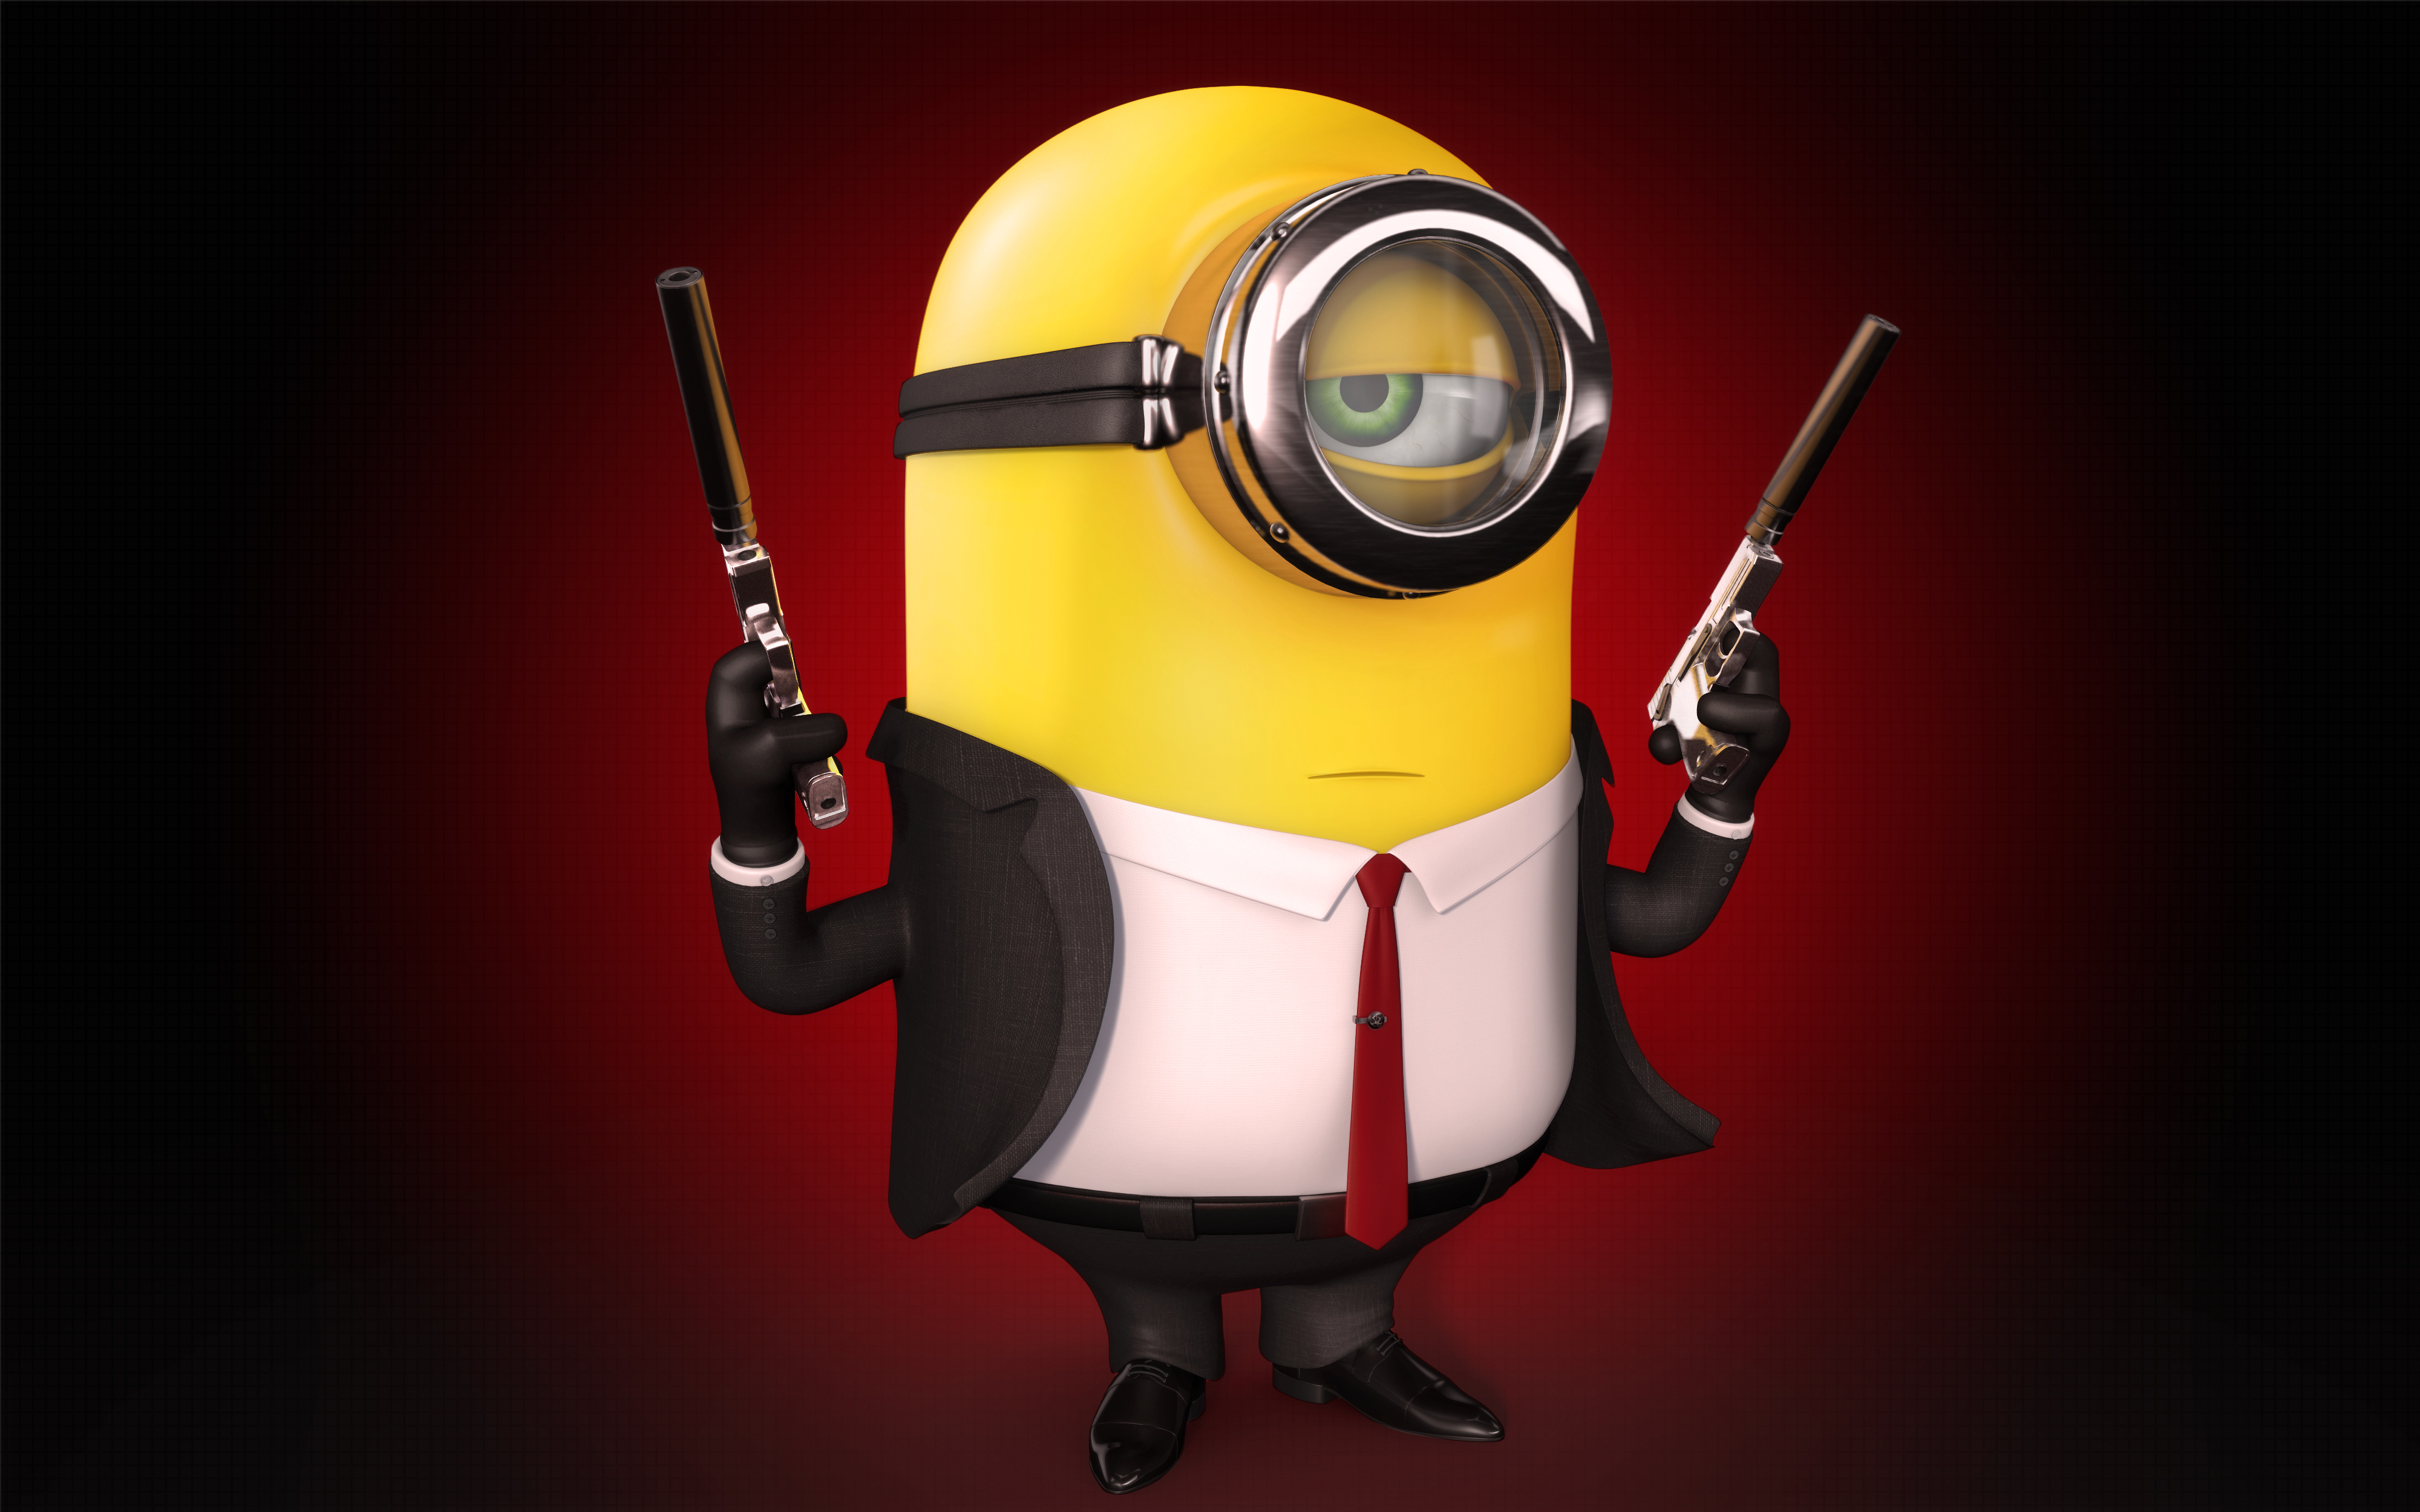 A Cute Collection Of Despicable Me 2 Minions | Wallpapers, Images ...